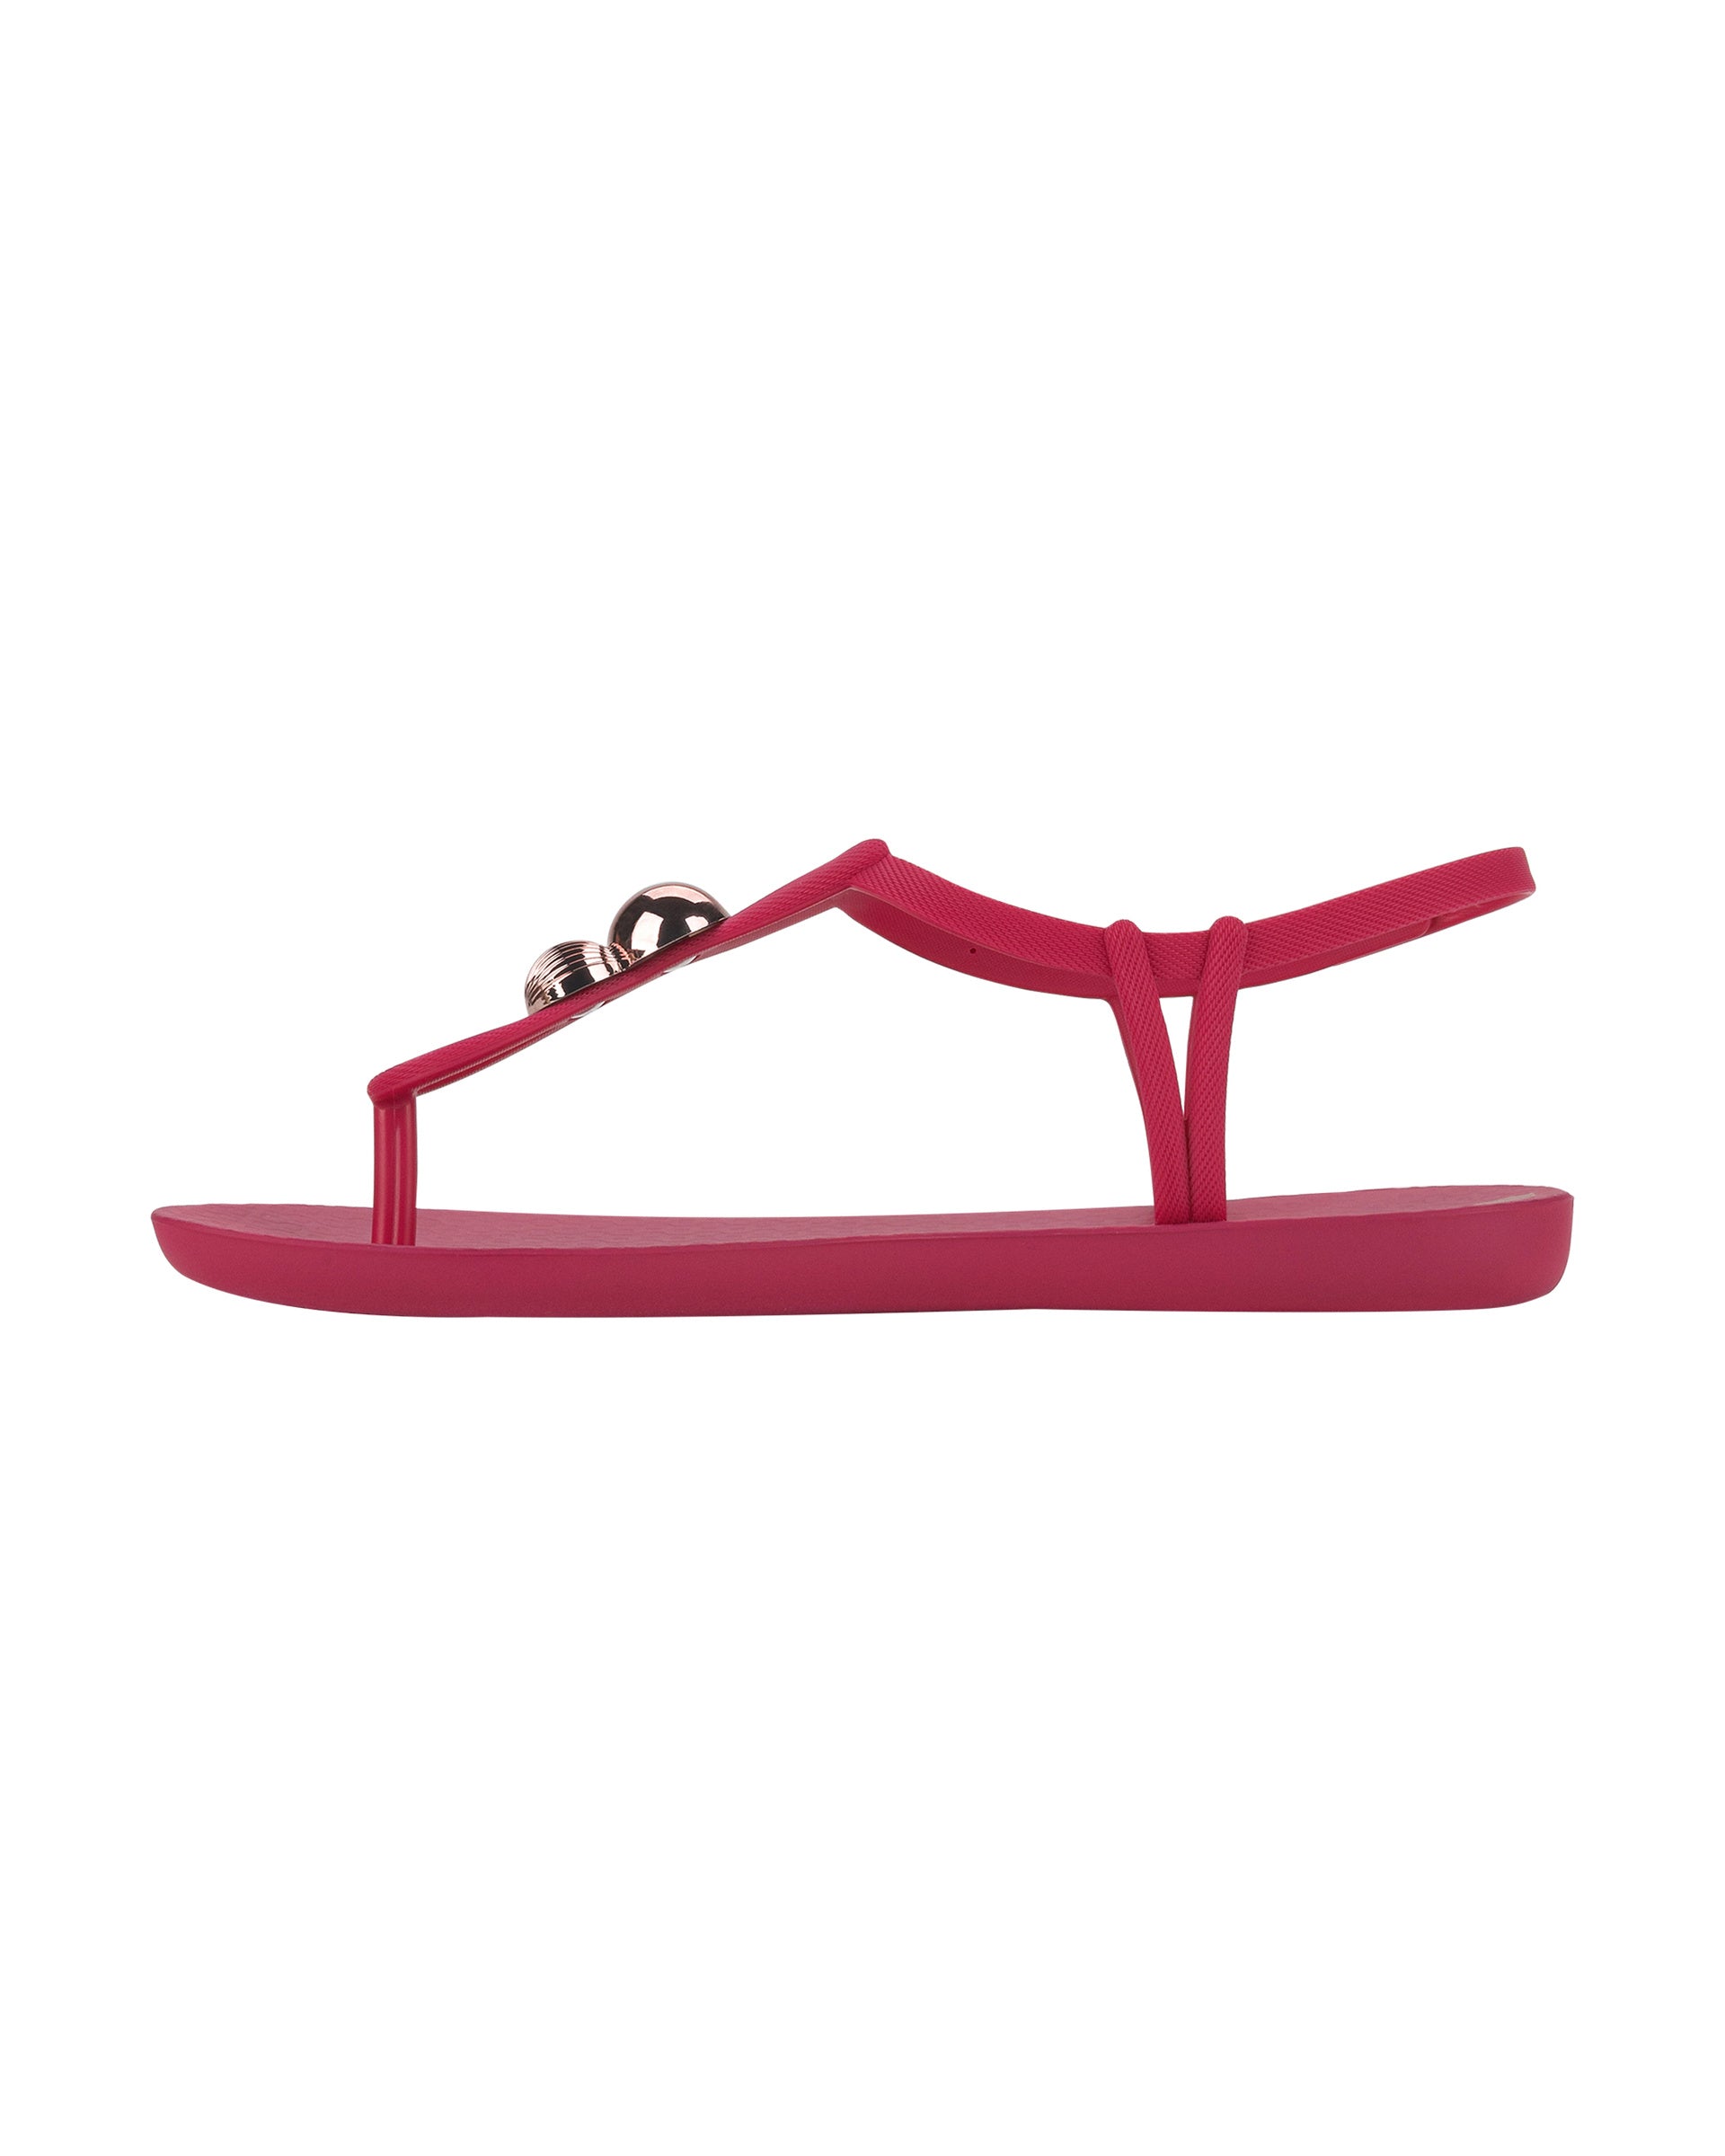 Inner side view of a pink Ipanema Class Spheres women's t-strap sandal with metallic bauble.